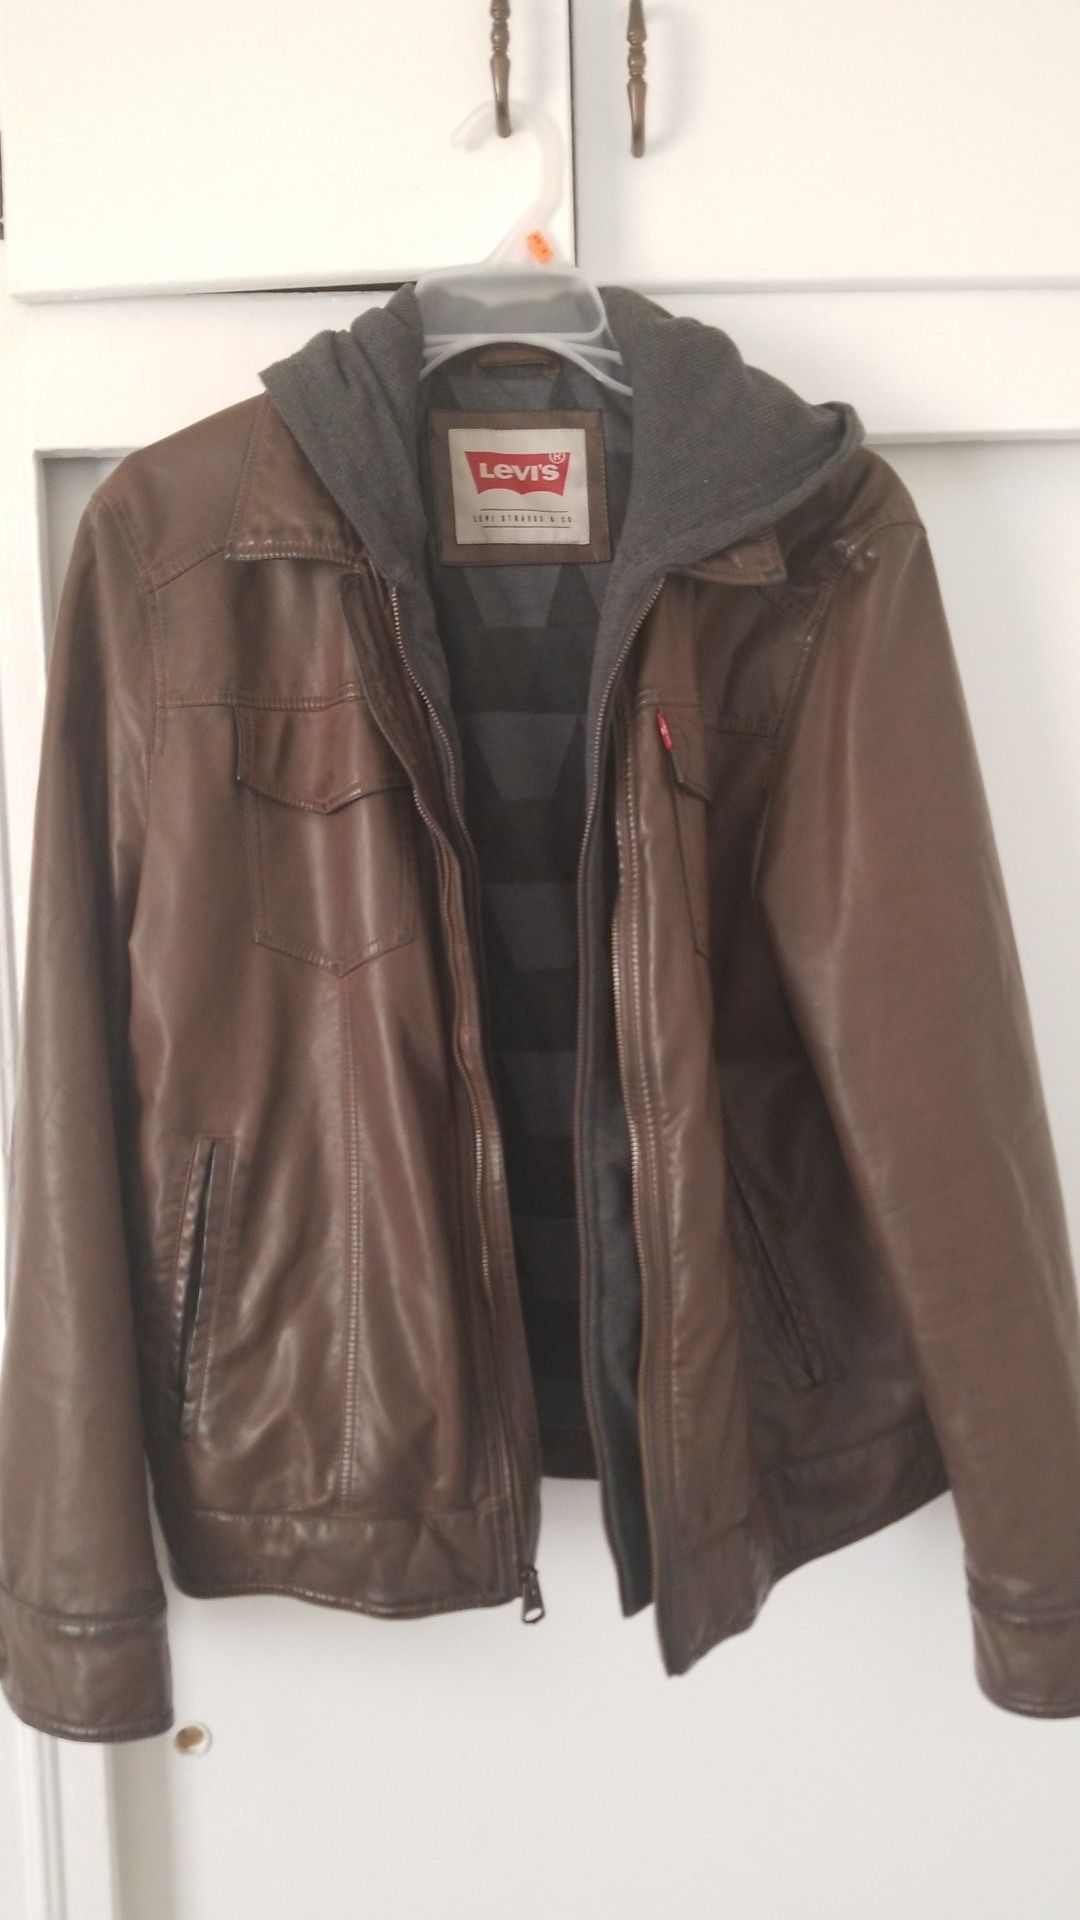 Brown Levis Jacket faux leather with hood - size Medium